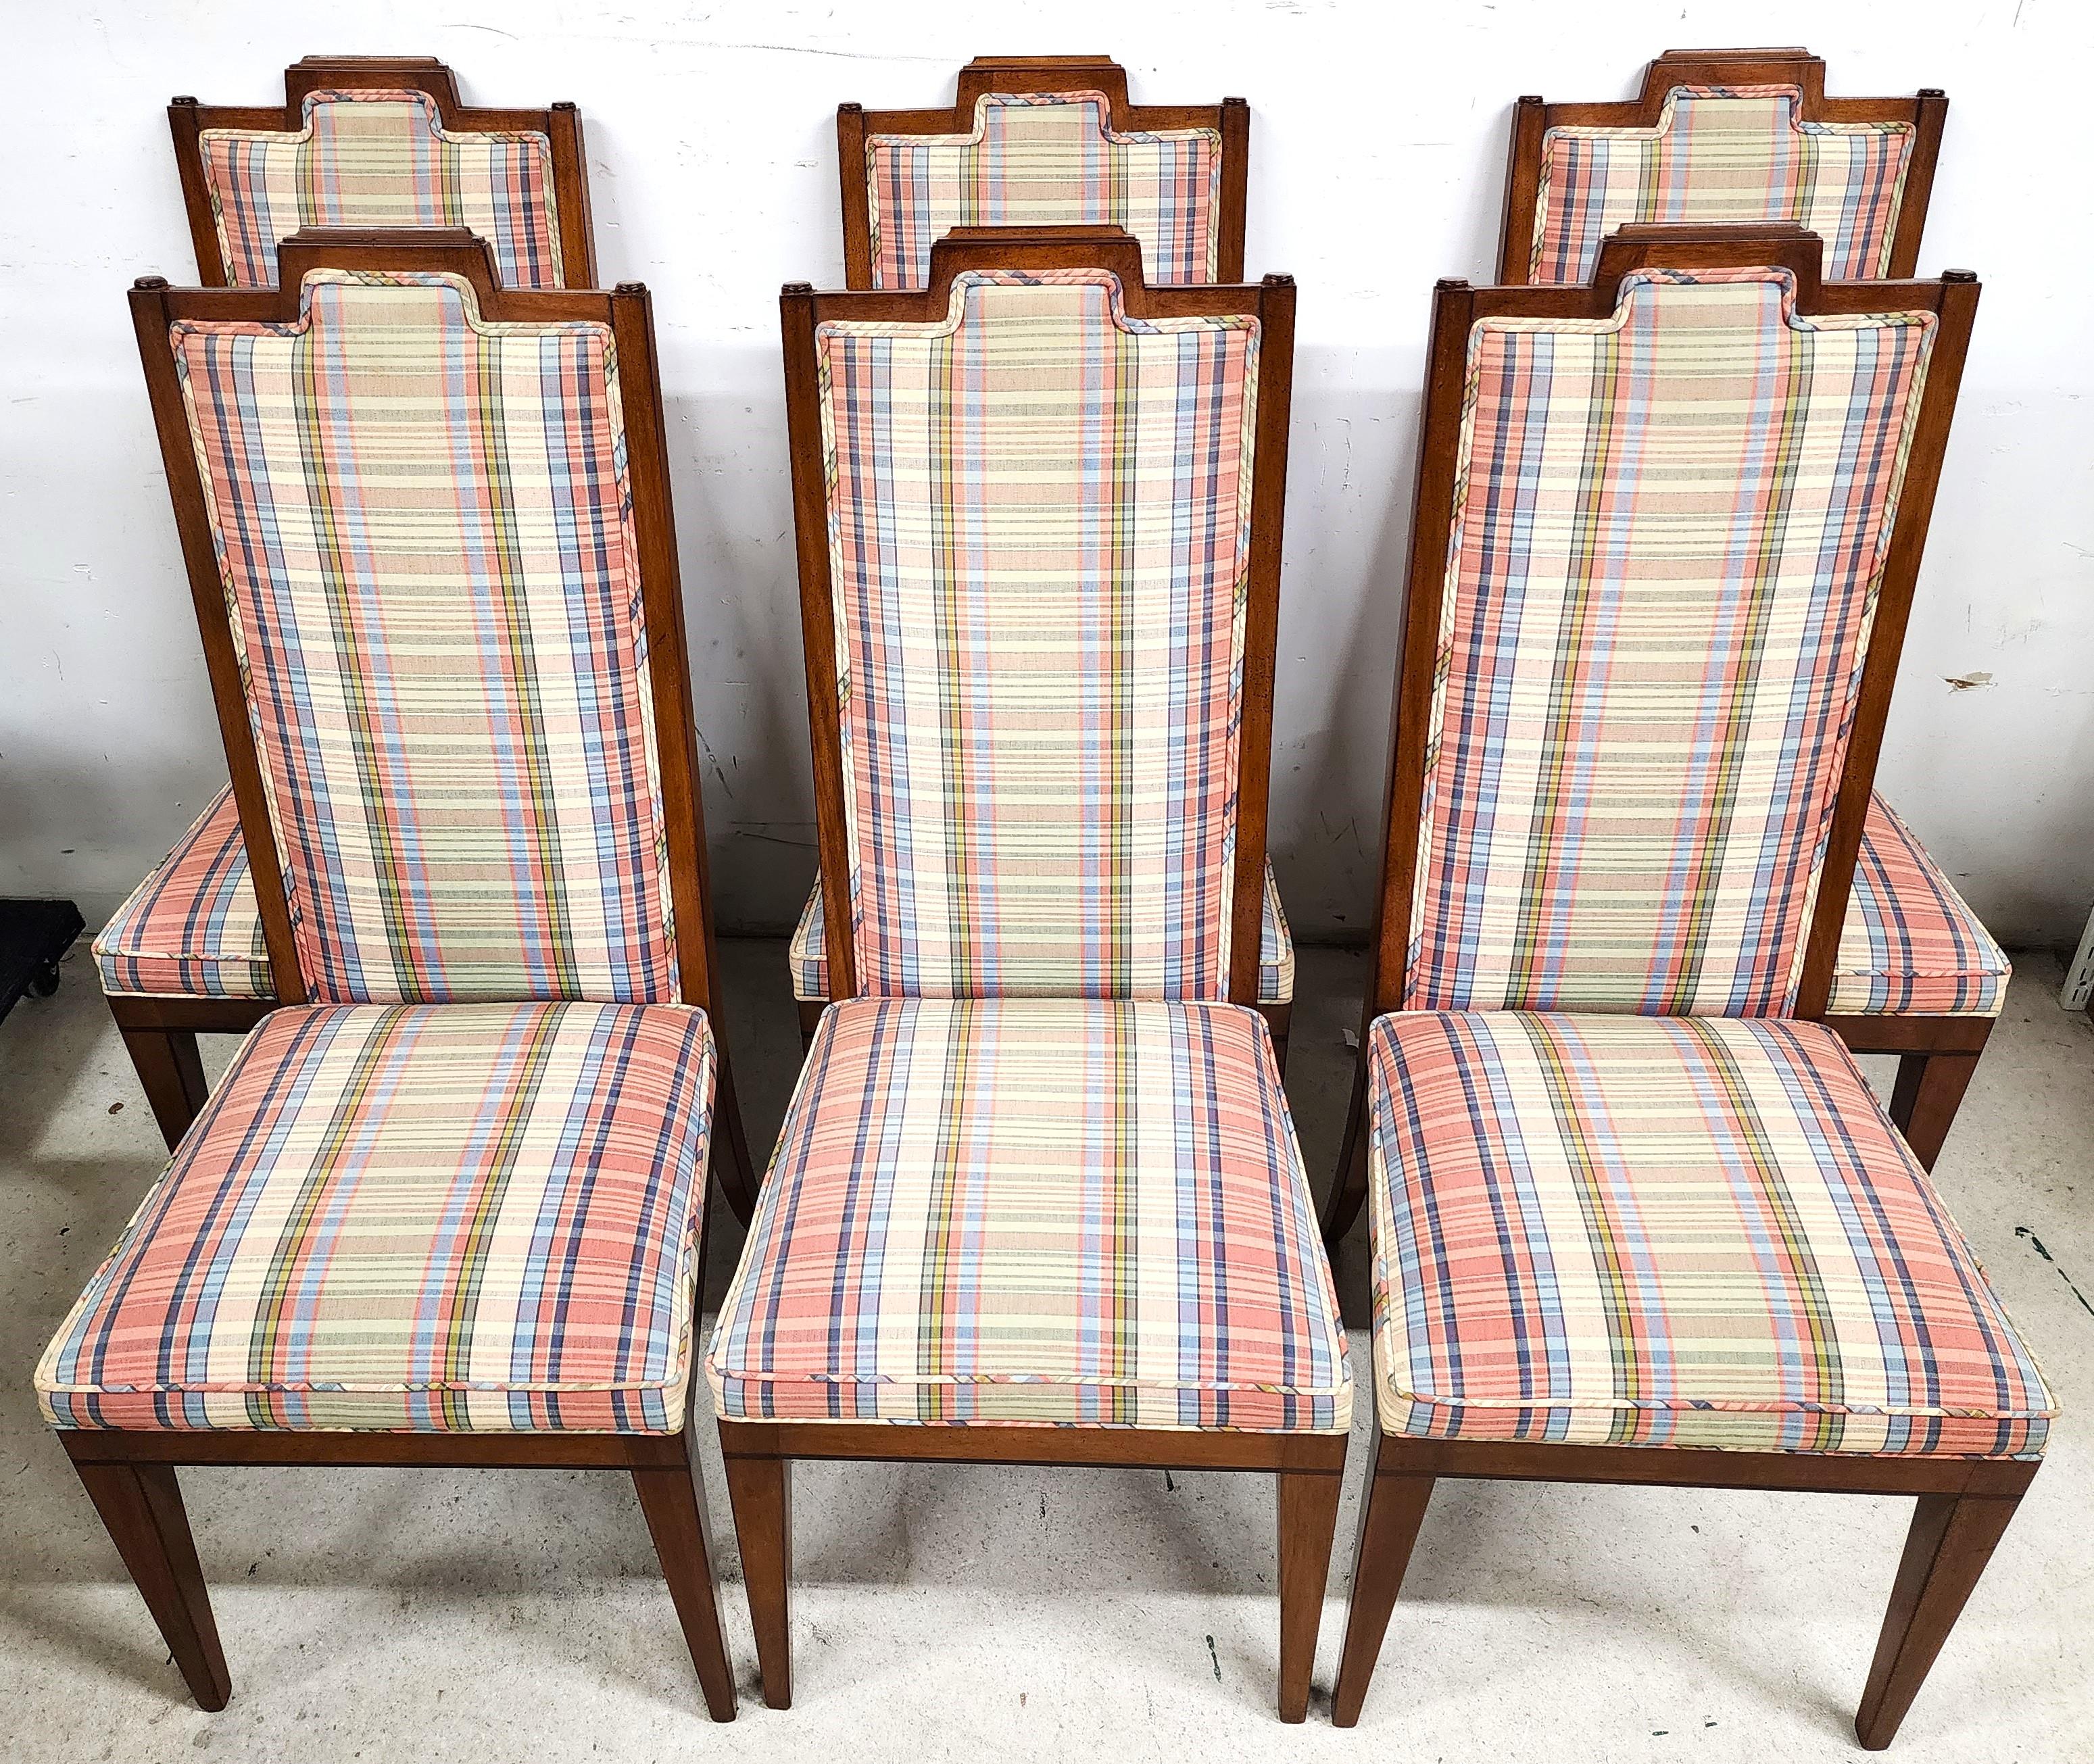 For FULL item description click on CONTINUE READING at the bottom of this page.

Offering One Of Our Recent Palm Beach Estate Fine Furniture Acquisitions Of A
Set of 6 Vintage MCM Dining Chairs Mid-Century 1950s

Approximate Measurements in